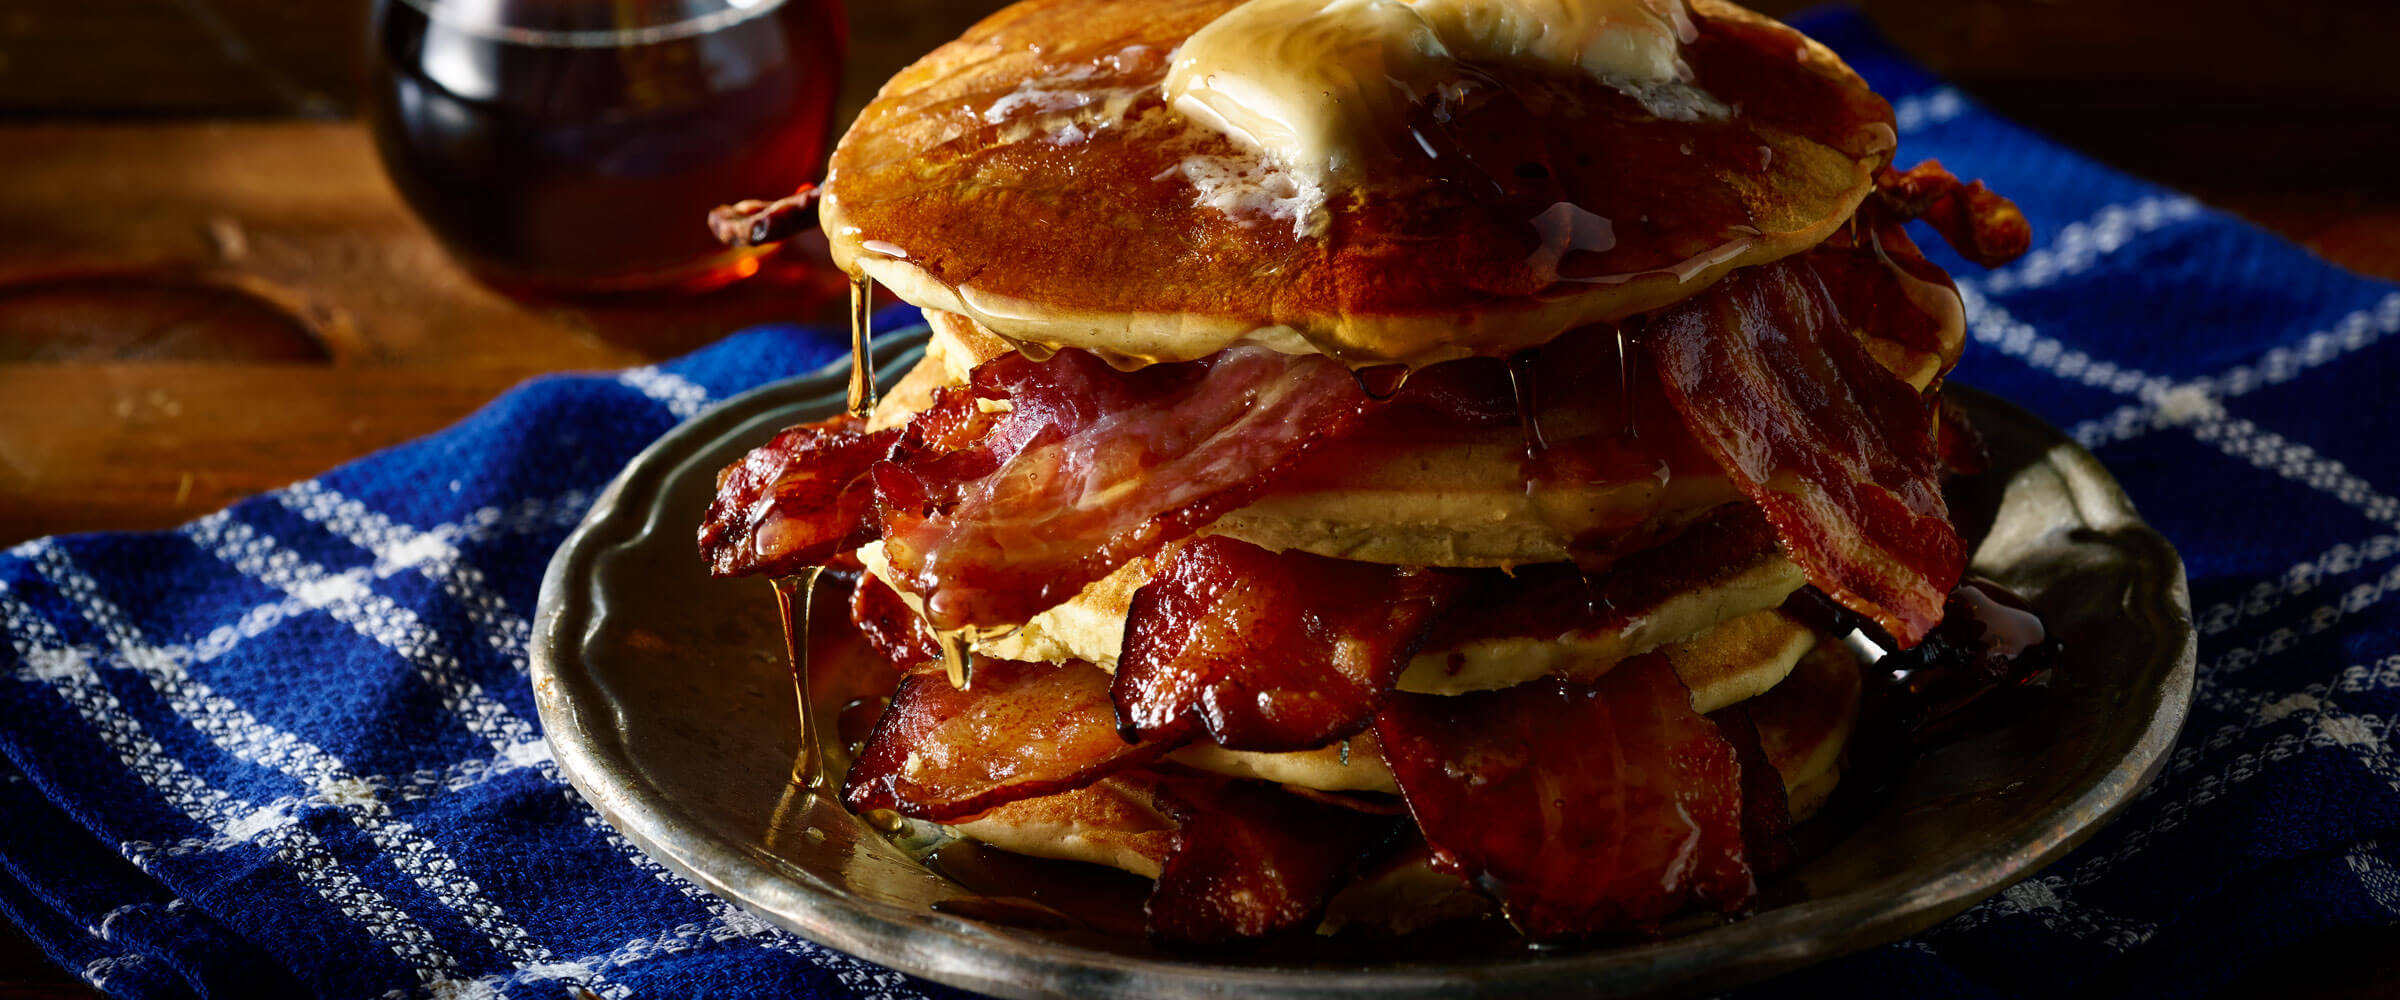 Bacon Pancakes piled high with syrup and butter on blue and white placemat